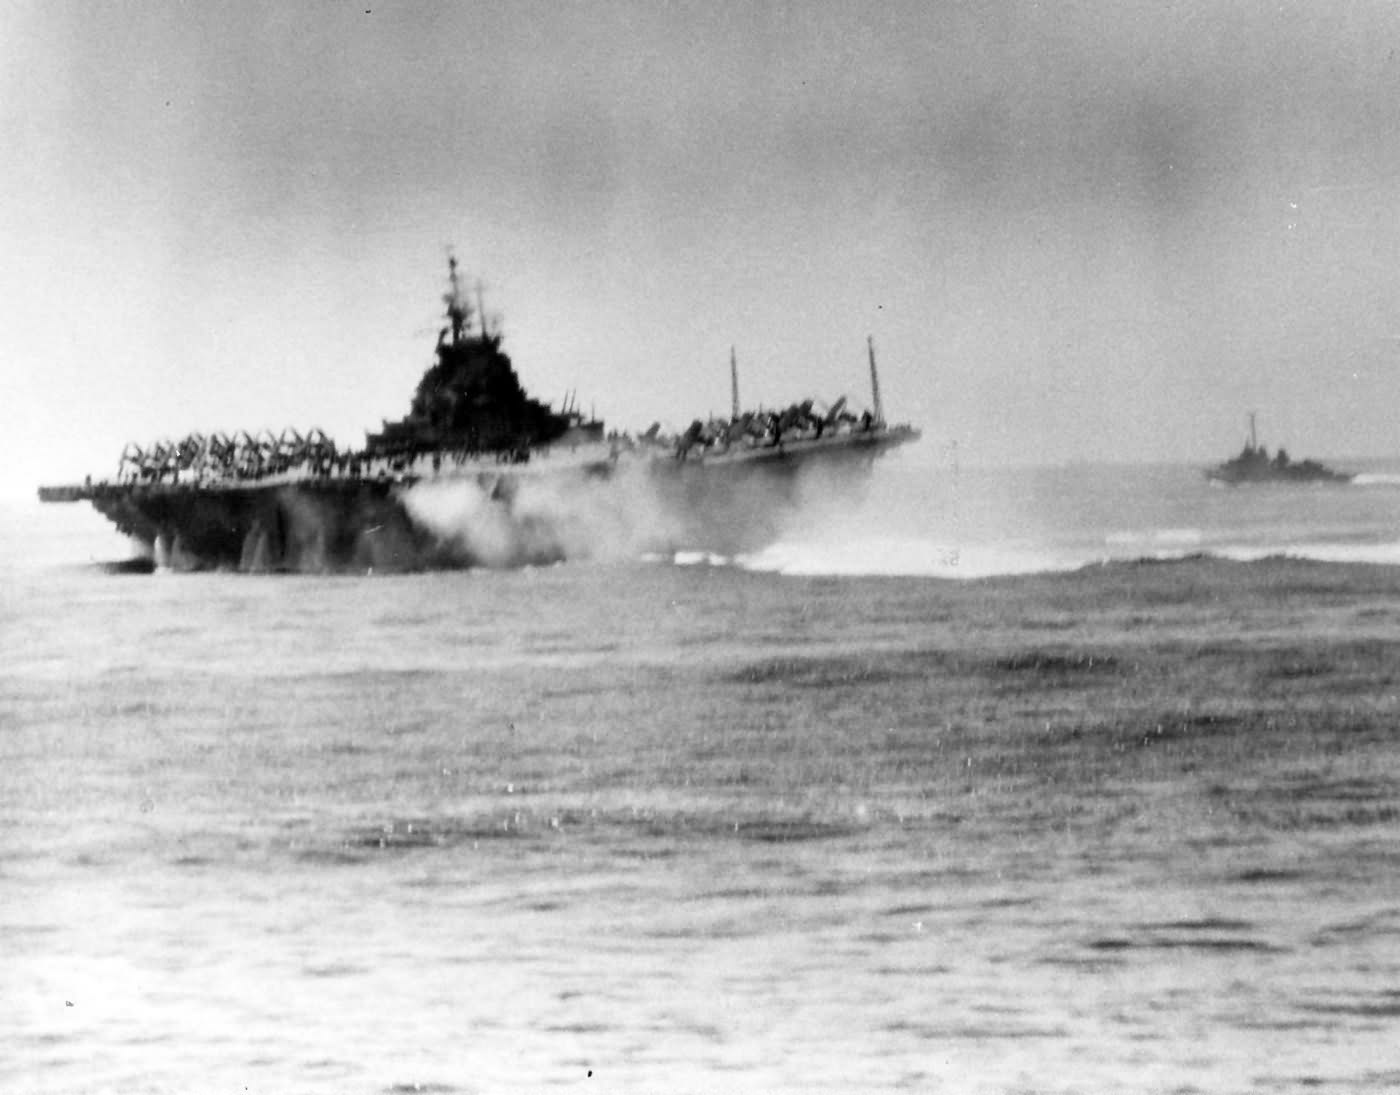 USS Intrepid CV-11 pictured after being hit by kamikaze